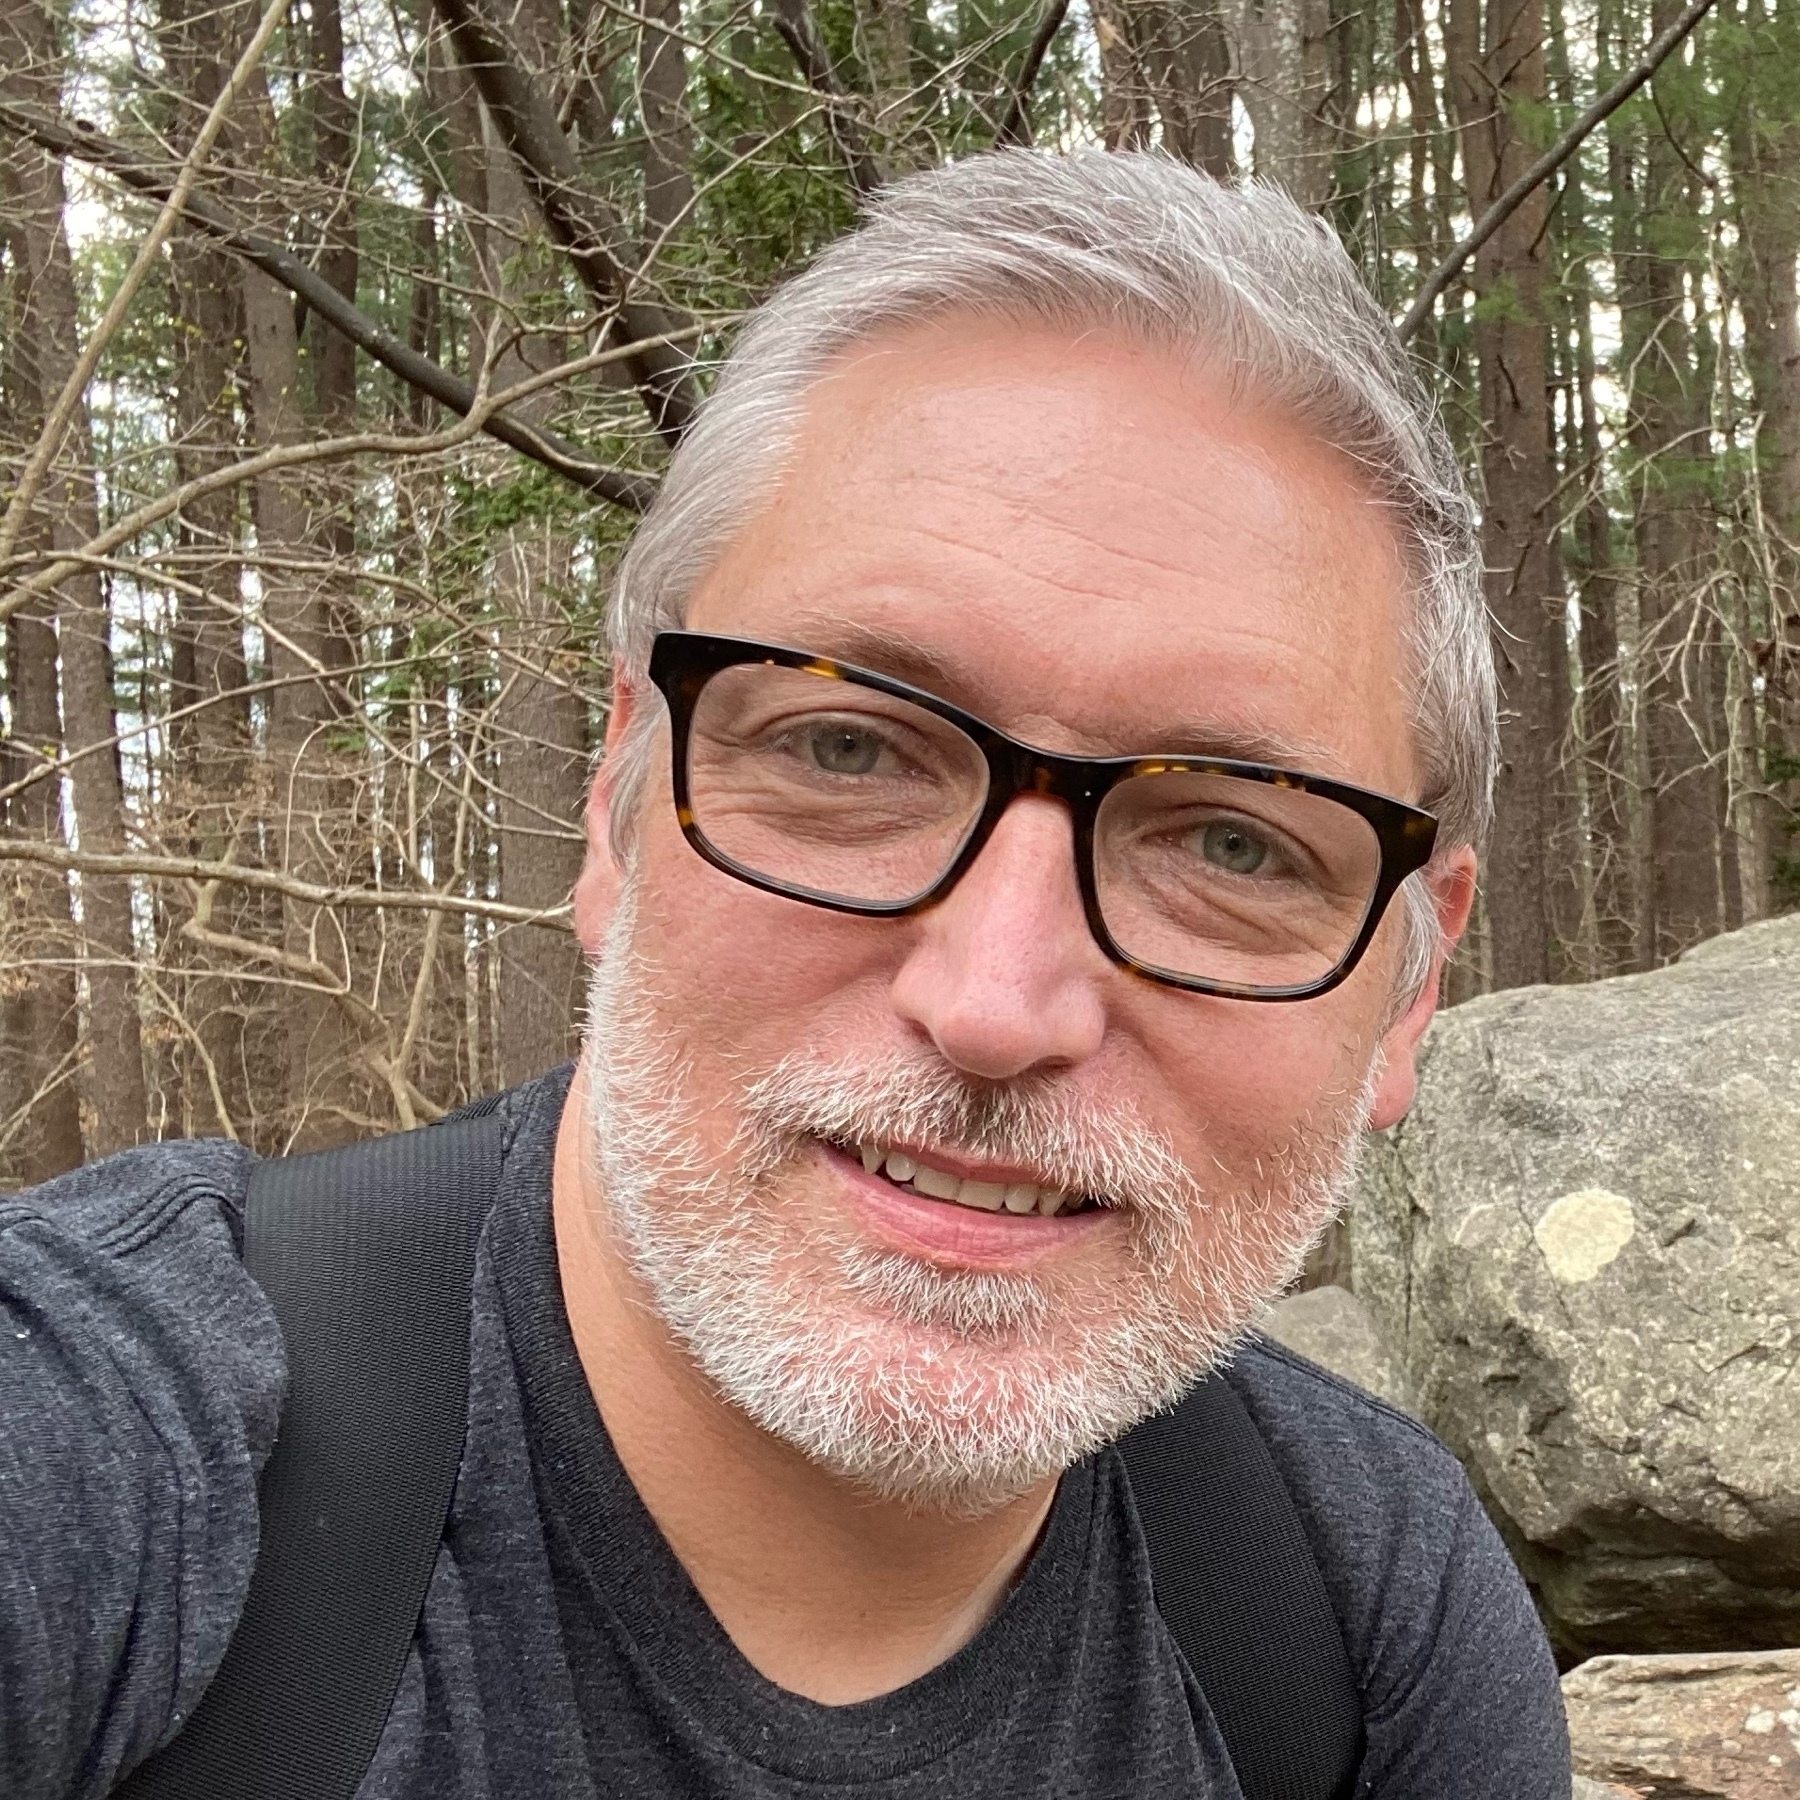 self portrait in the woods with head tilted sporting white beard stubble and gray hair